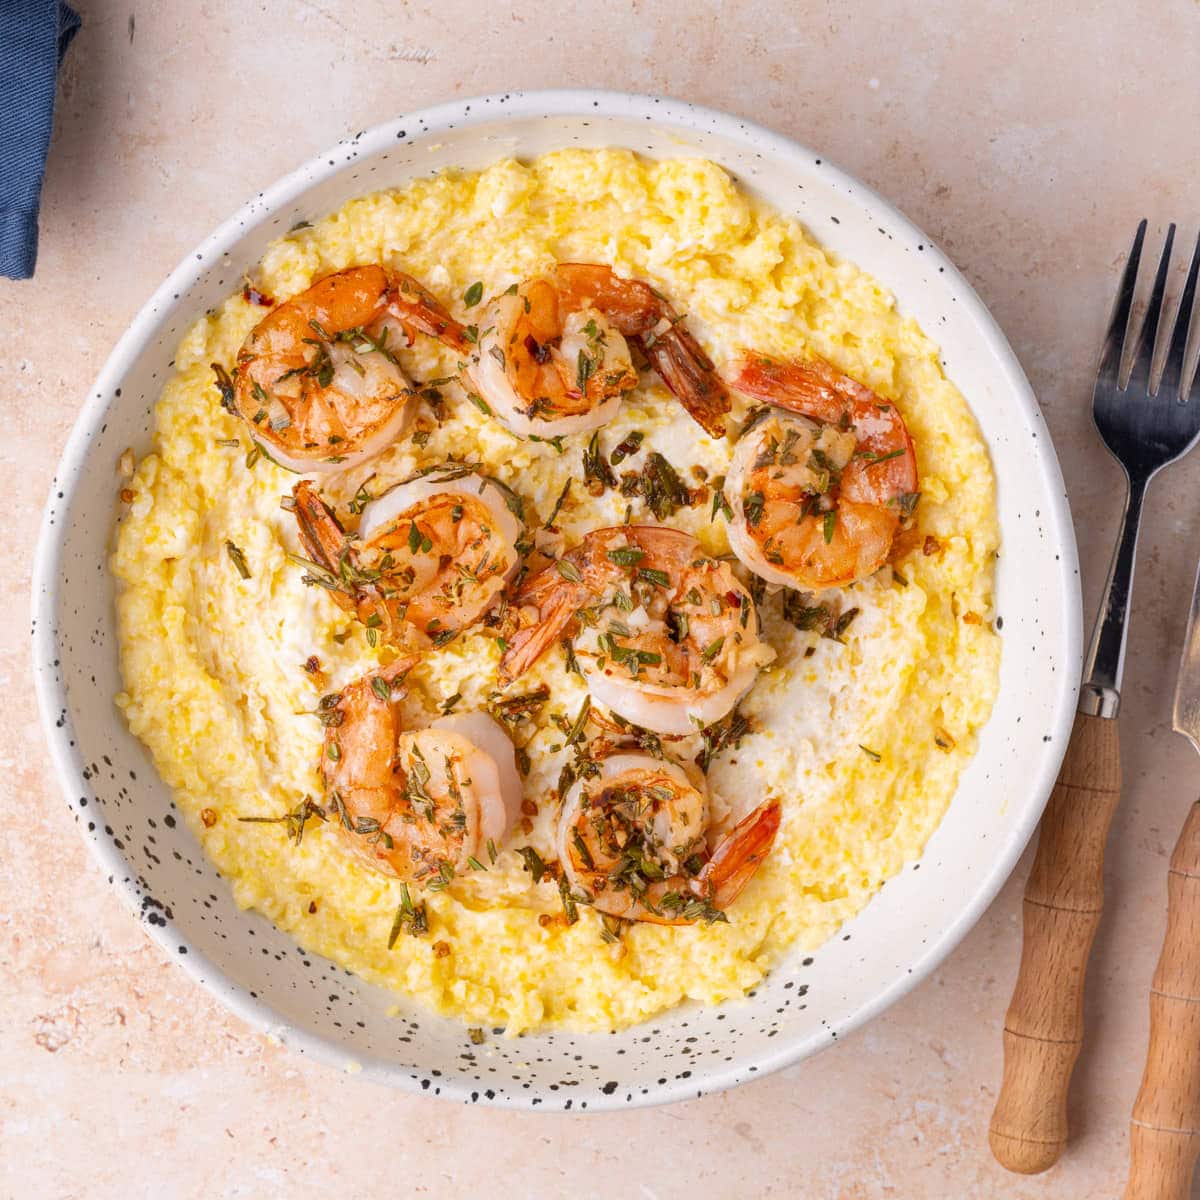 Herbed shrimp and polenta with goat cheese served in a shallow bowl.